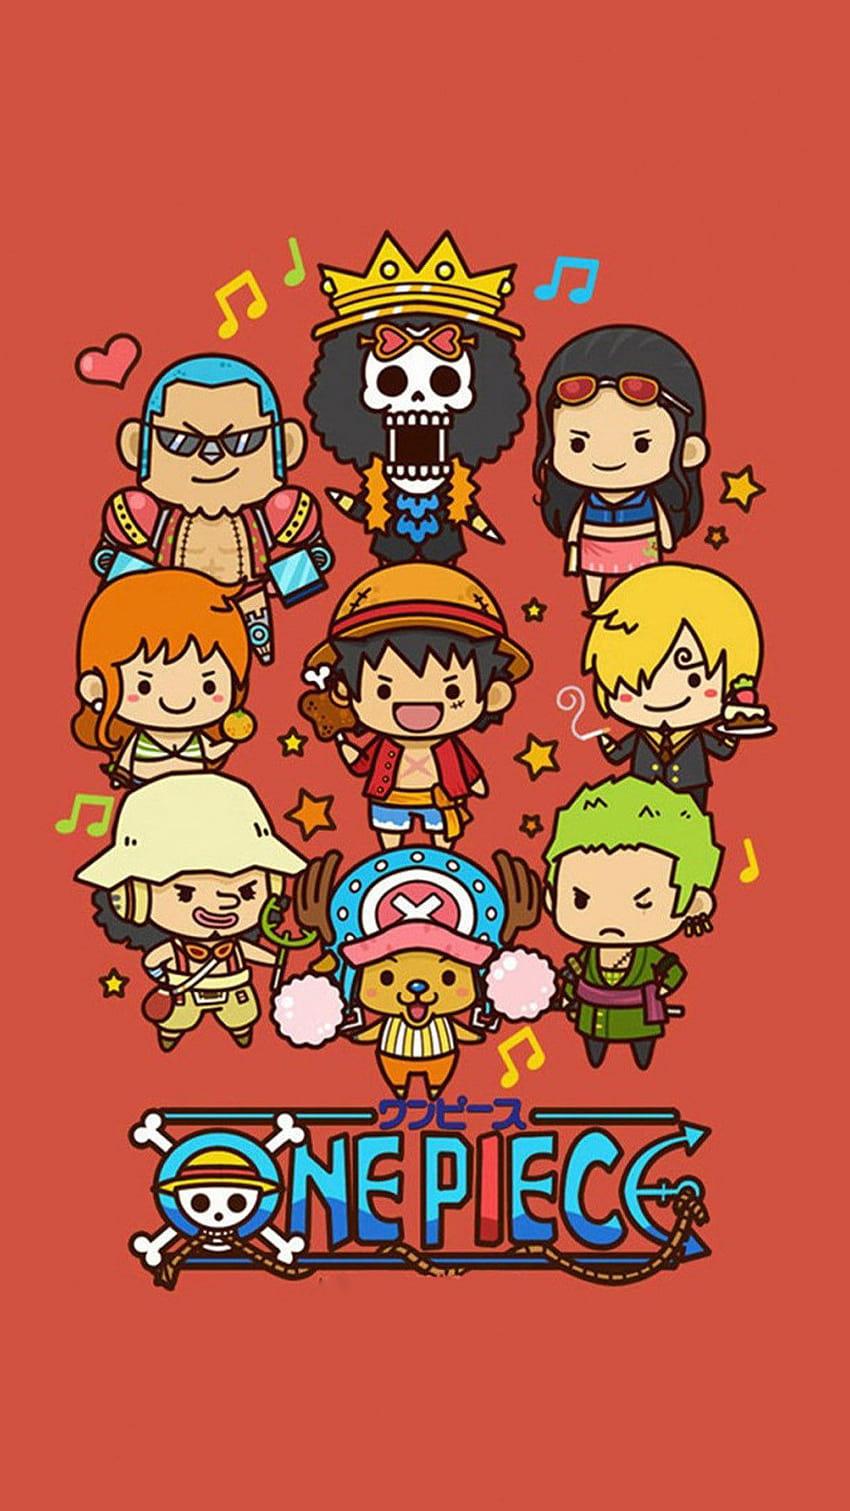 Cute Lovely One Piece Cartoon Poster Iphone 6, android one piece HD phone wallpaper